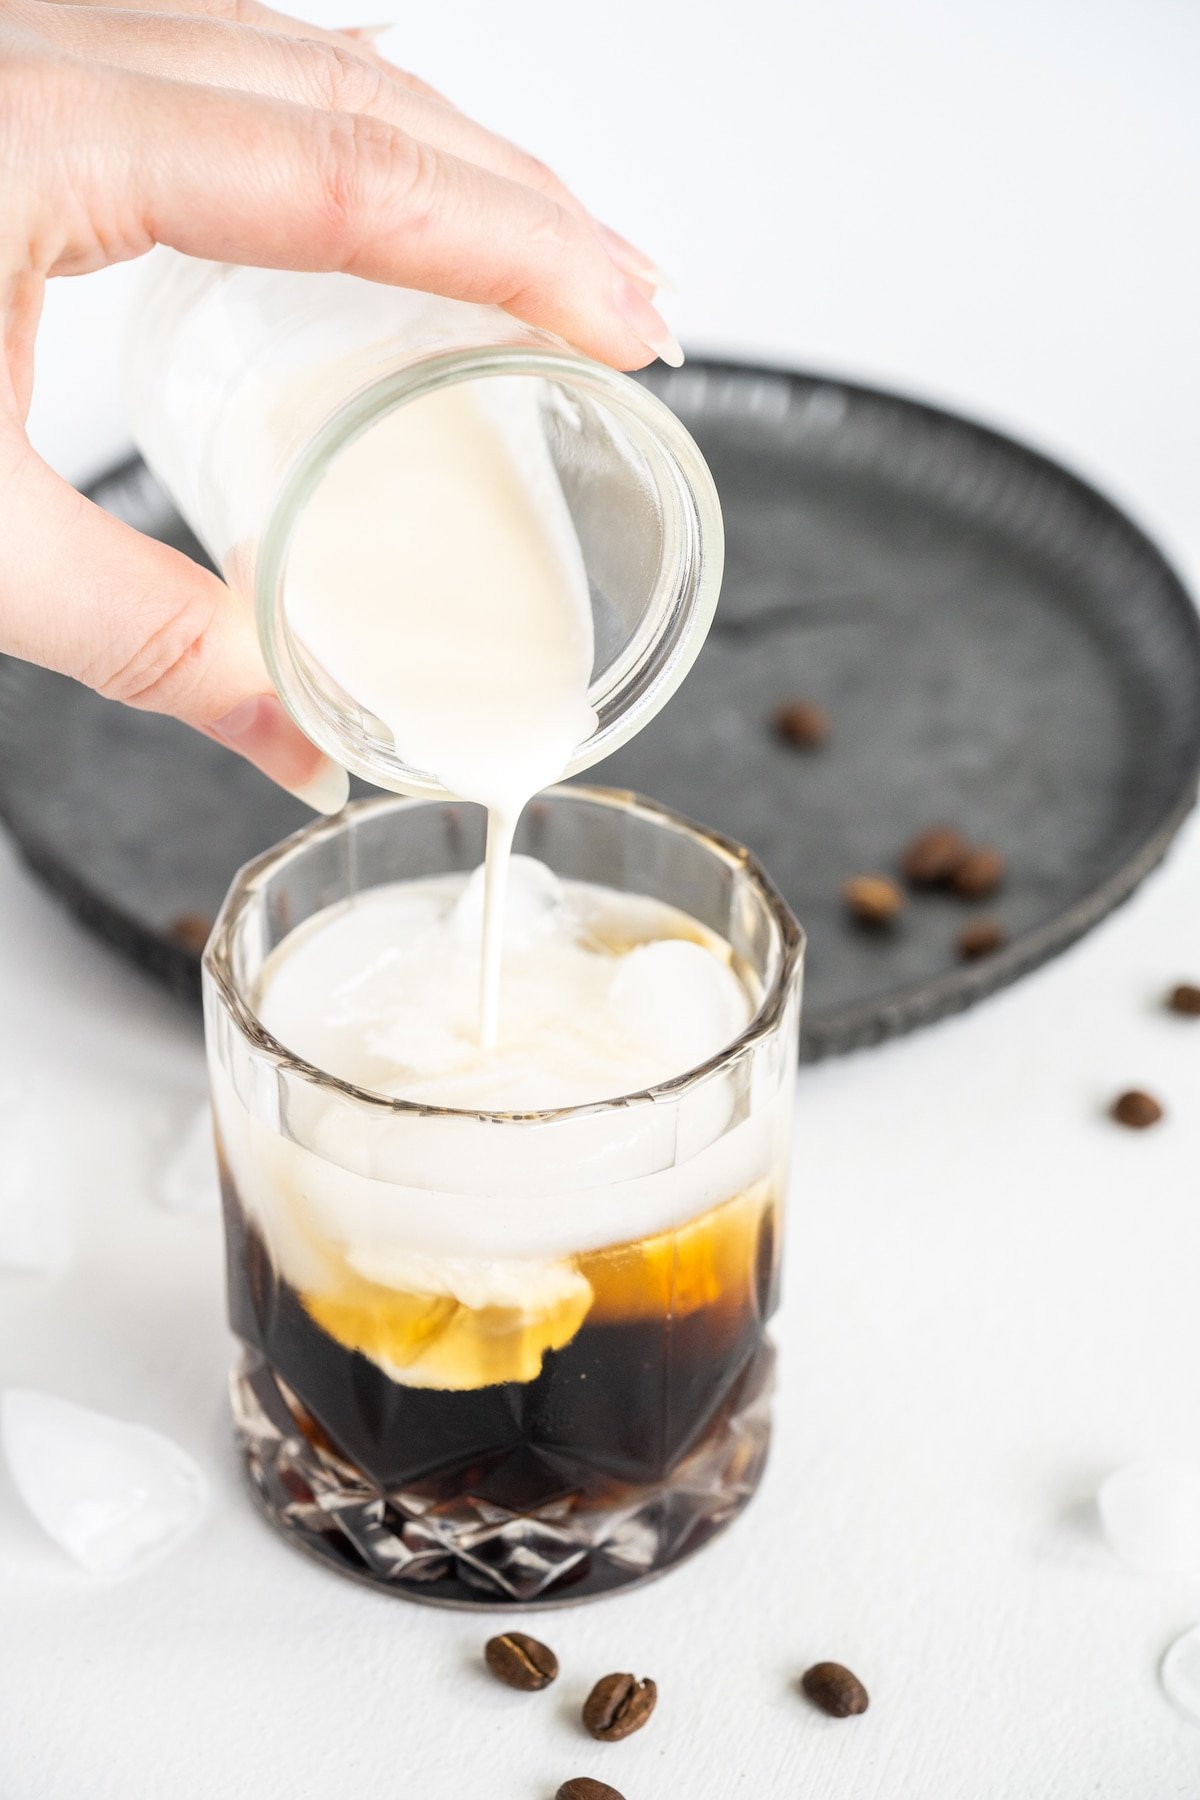 Cream being poured into cocktail glass to finish making a white russian